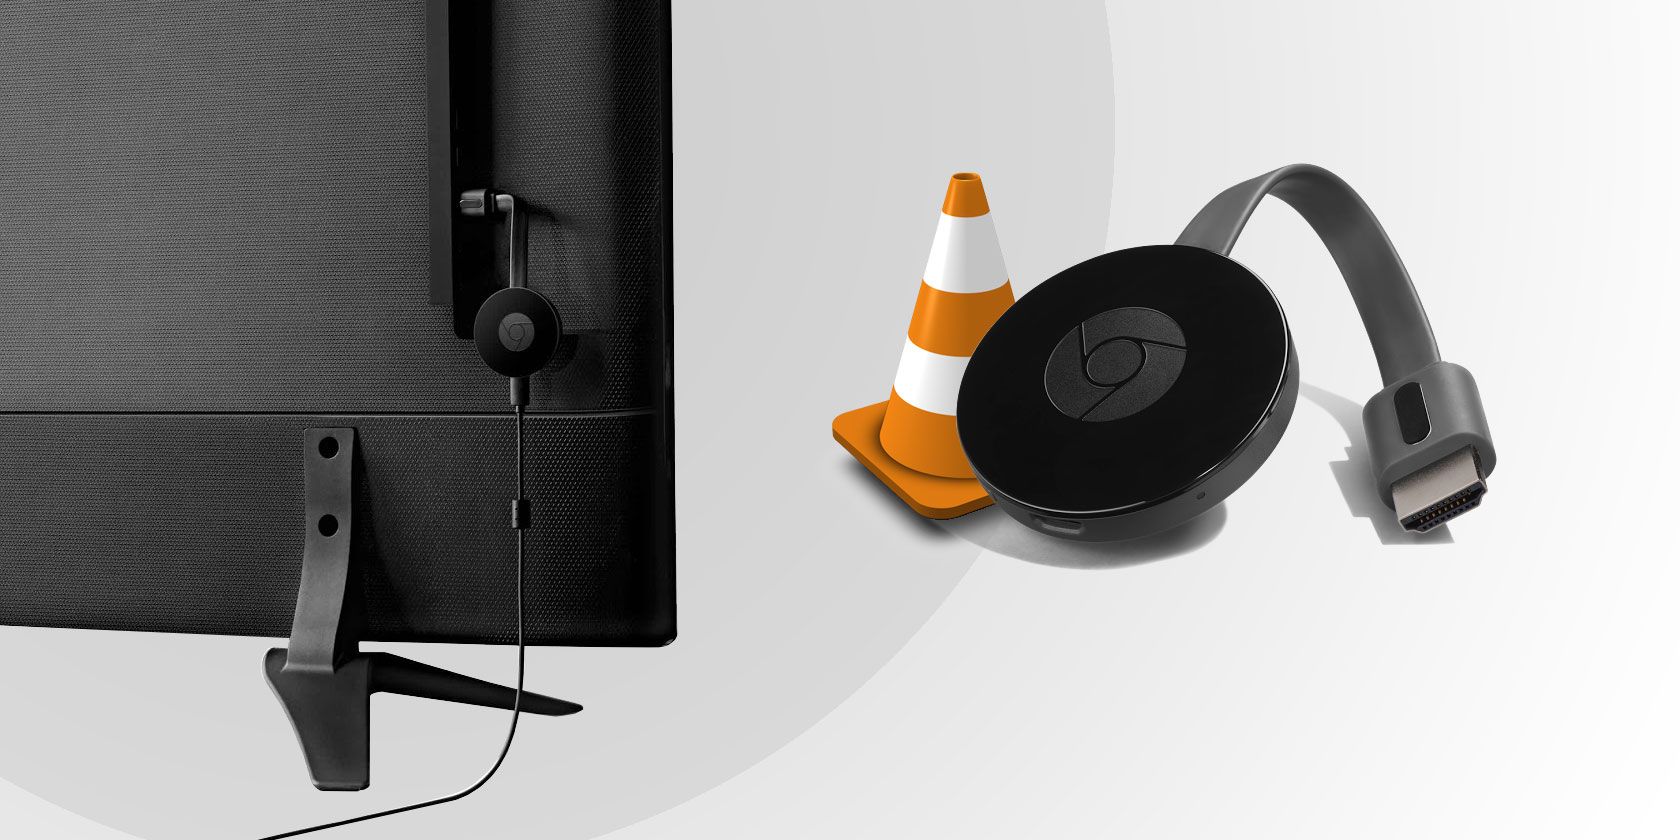 Koncentration binær træfning How to Stream Videos From VLC to Chromecast